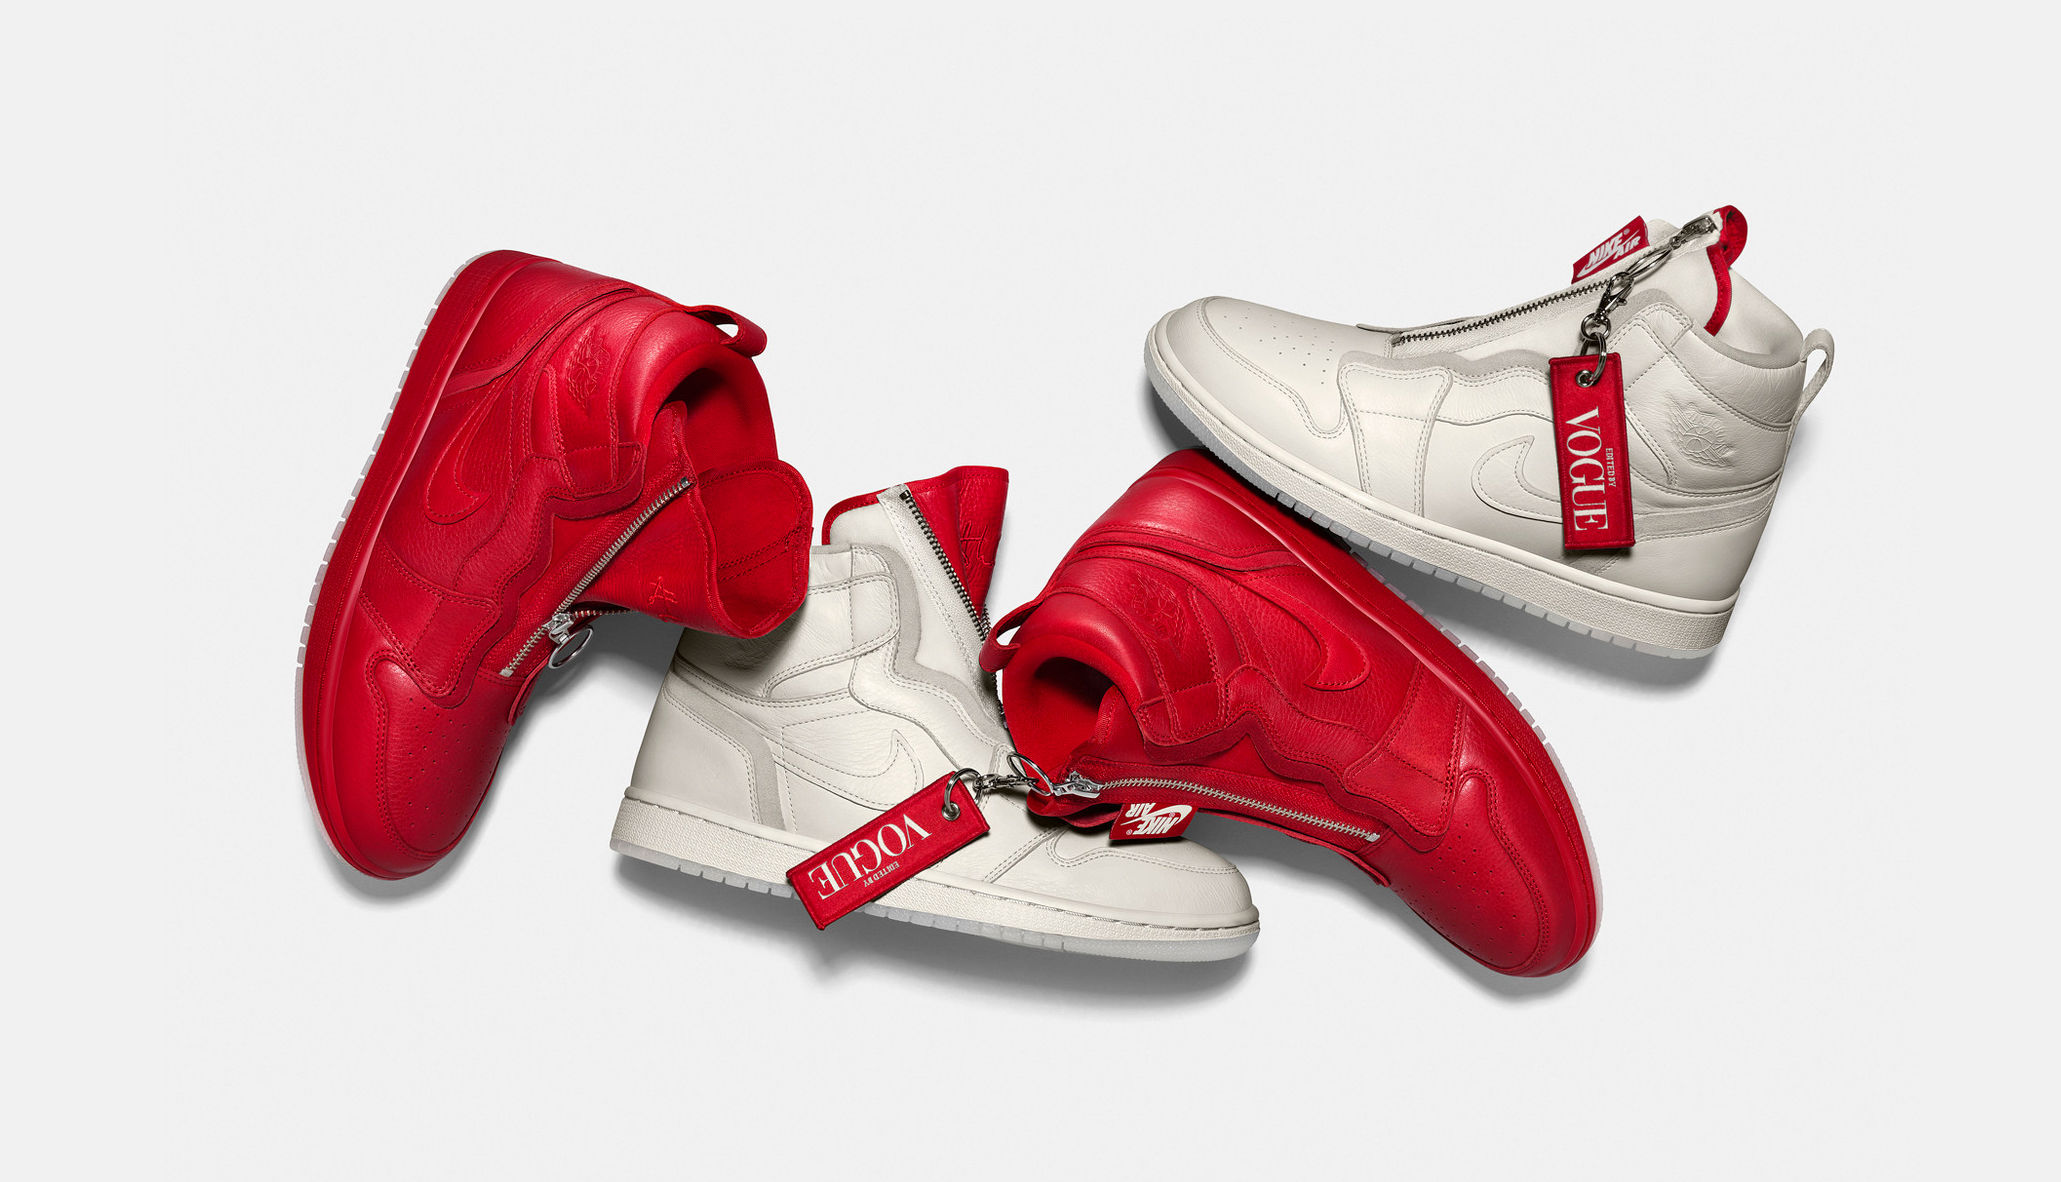 Anna Wintour collaborates with Nike on limited-edition Air Jordans